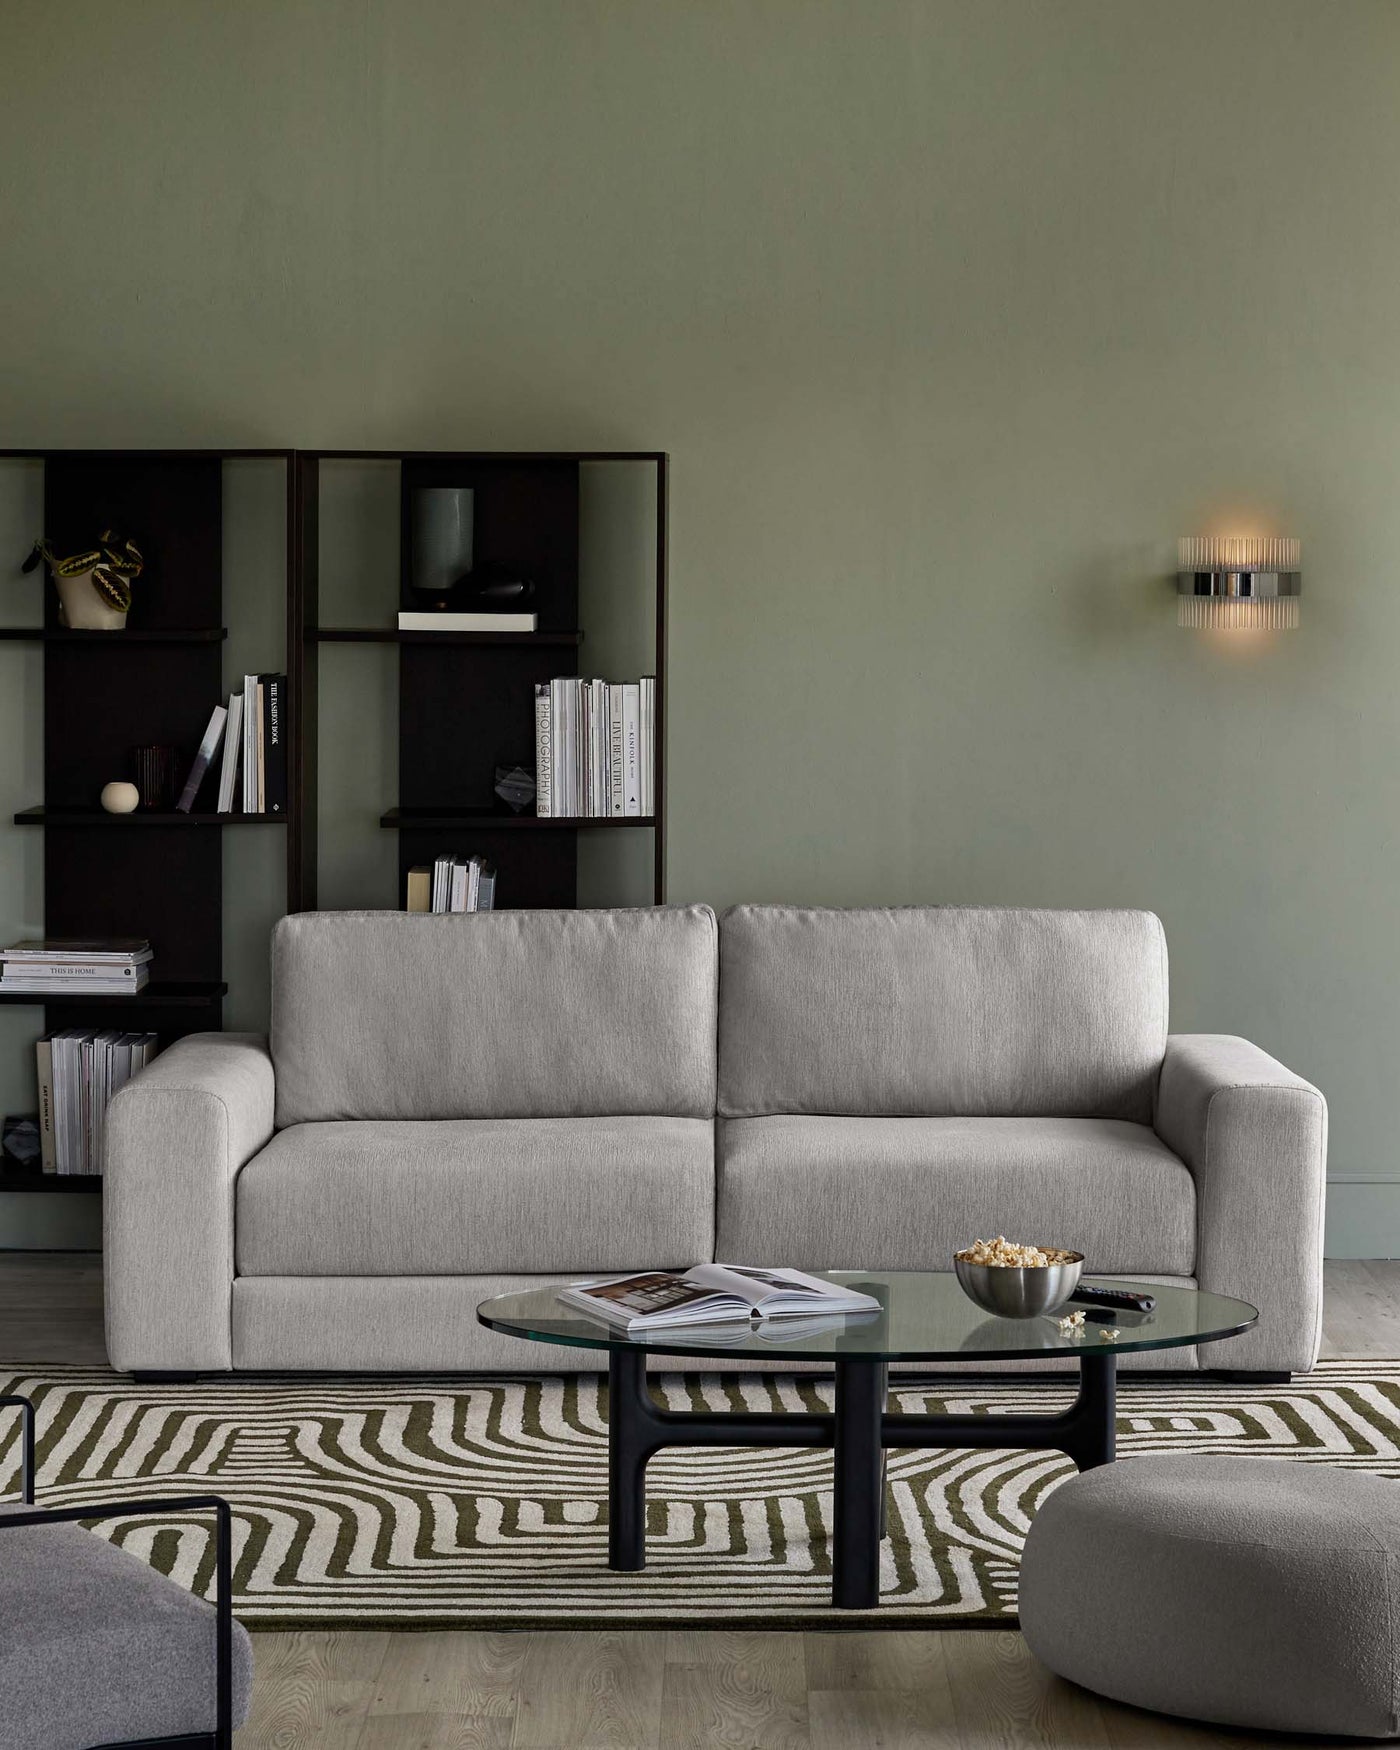 Modern living room featuring a minimalist light grey upholstered sofa with clean lines and a plush look, complemented by a sleek, oval-shaped glass-top coffee table with a black frame. An oval-shaped grey ottoman matches the sofa. The set is arranged on a patterned area rug with an undulating design, and a contemporary open shelving unit in black behind the sofa displays an assorted collection of books and decorative items.